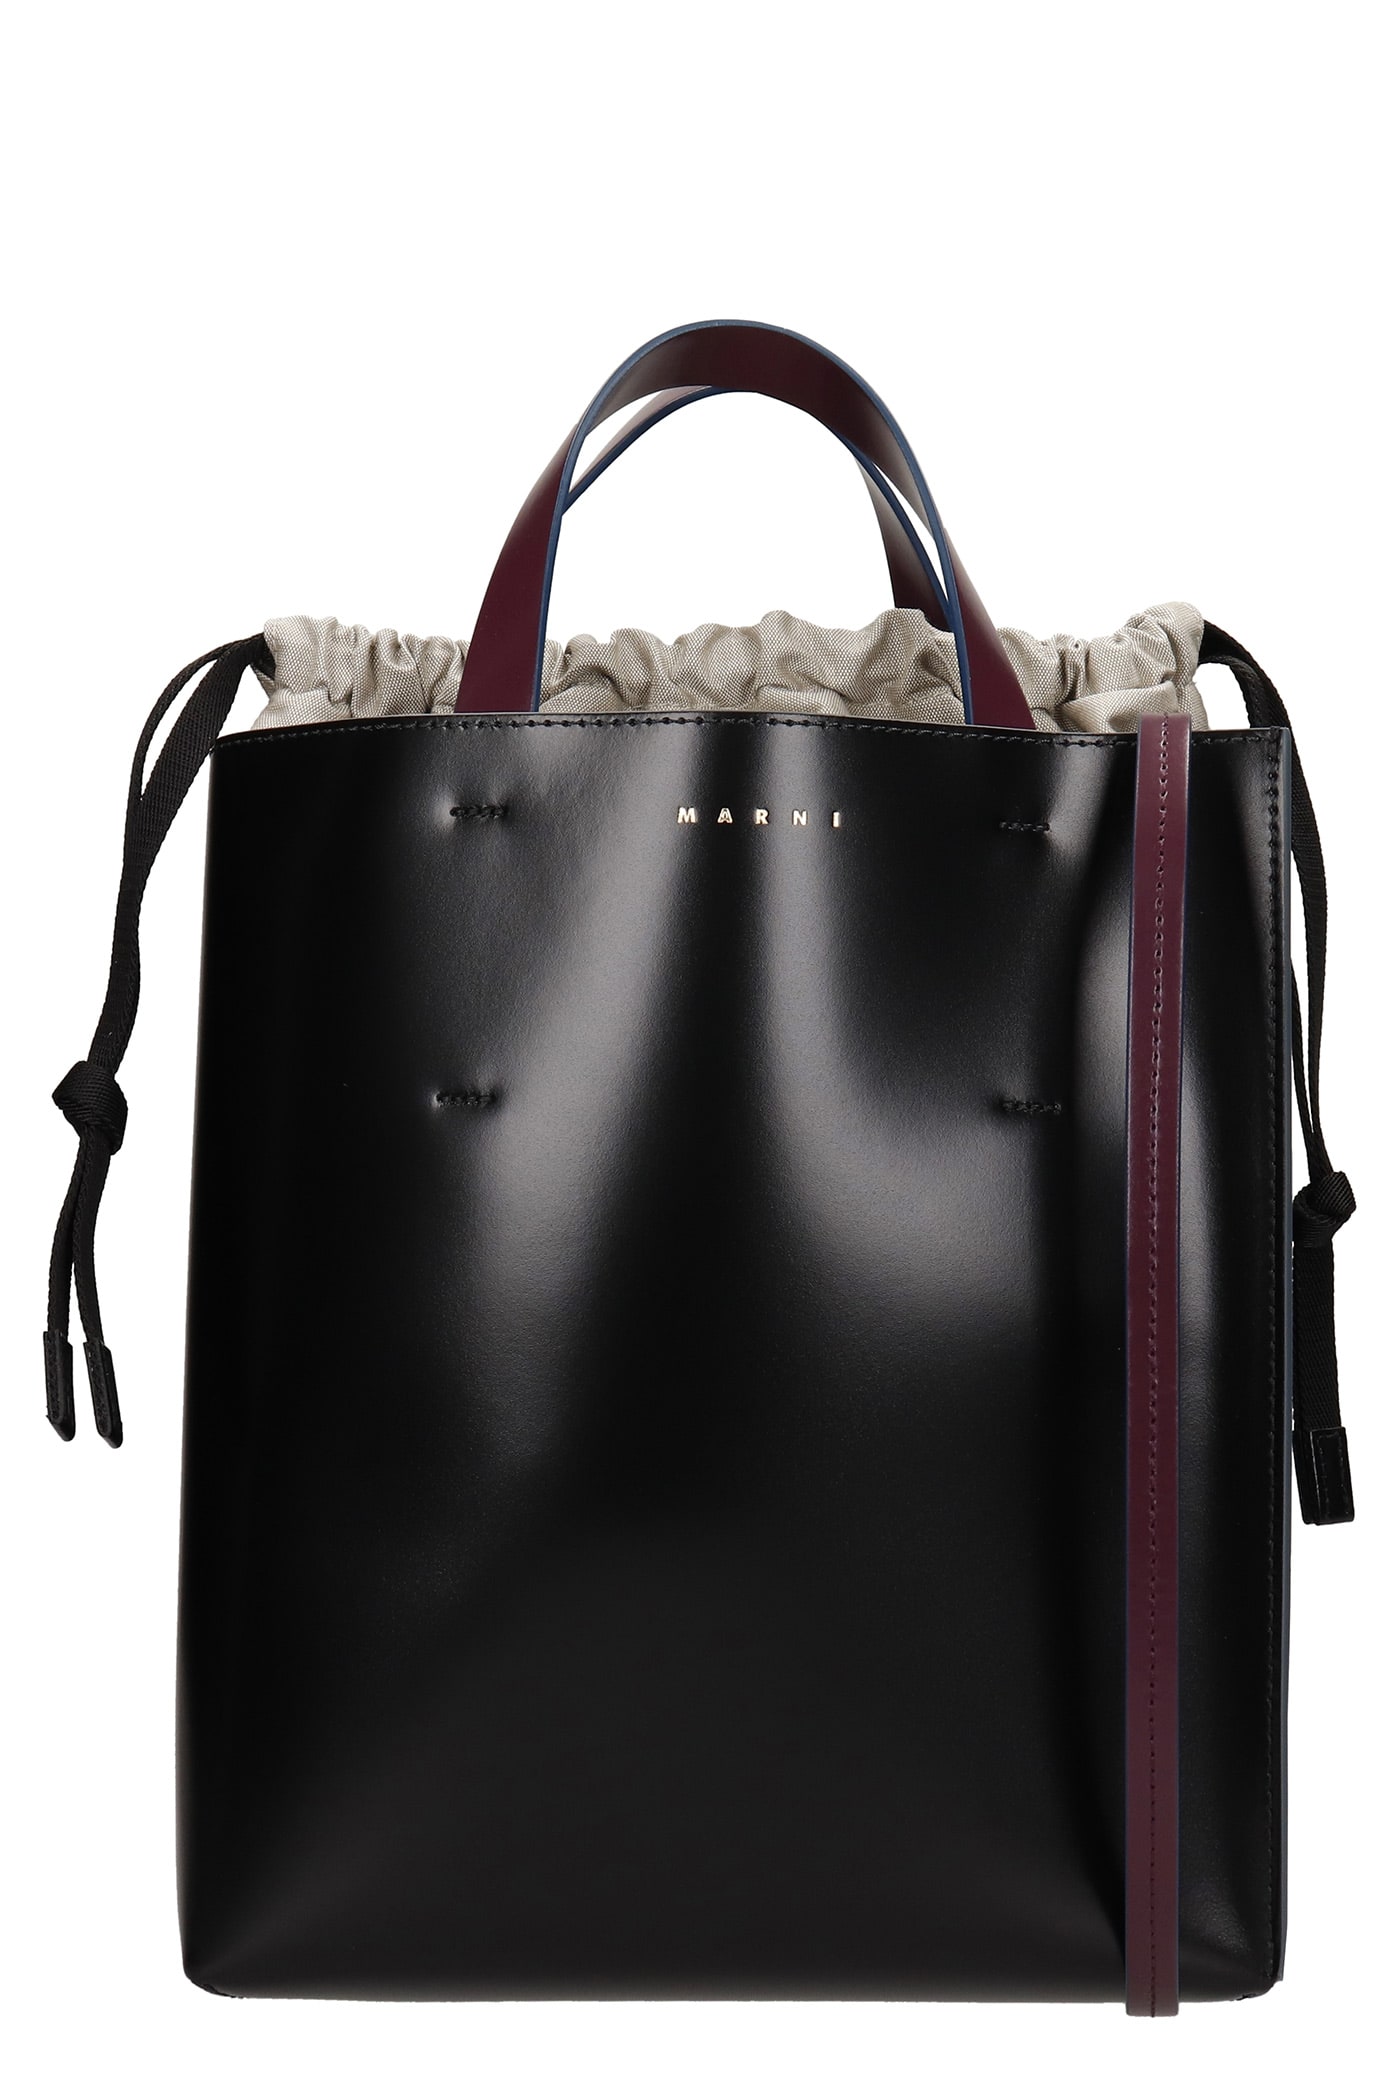 Marni Museo Tote In Black Leather